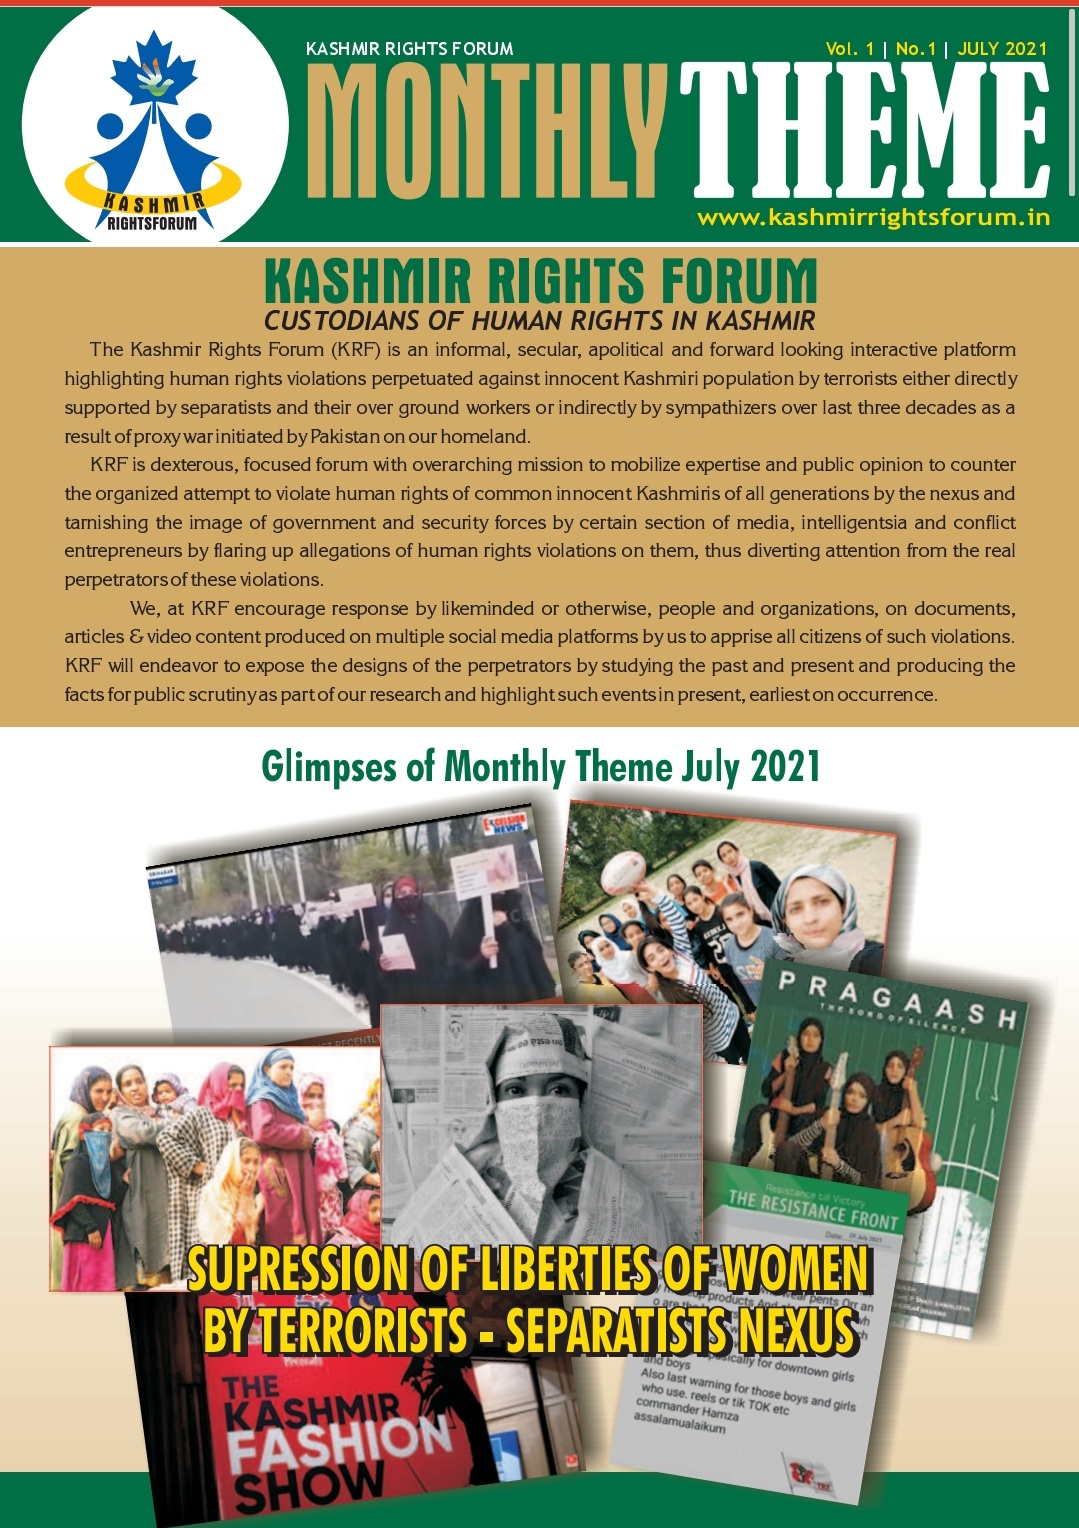 A preview of Monthly Theme July 2021 comprising of Kashmir's women rock band and the mishandling, suppression of women in Kashmir by Radicalists and terrorists.